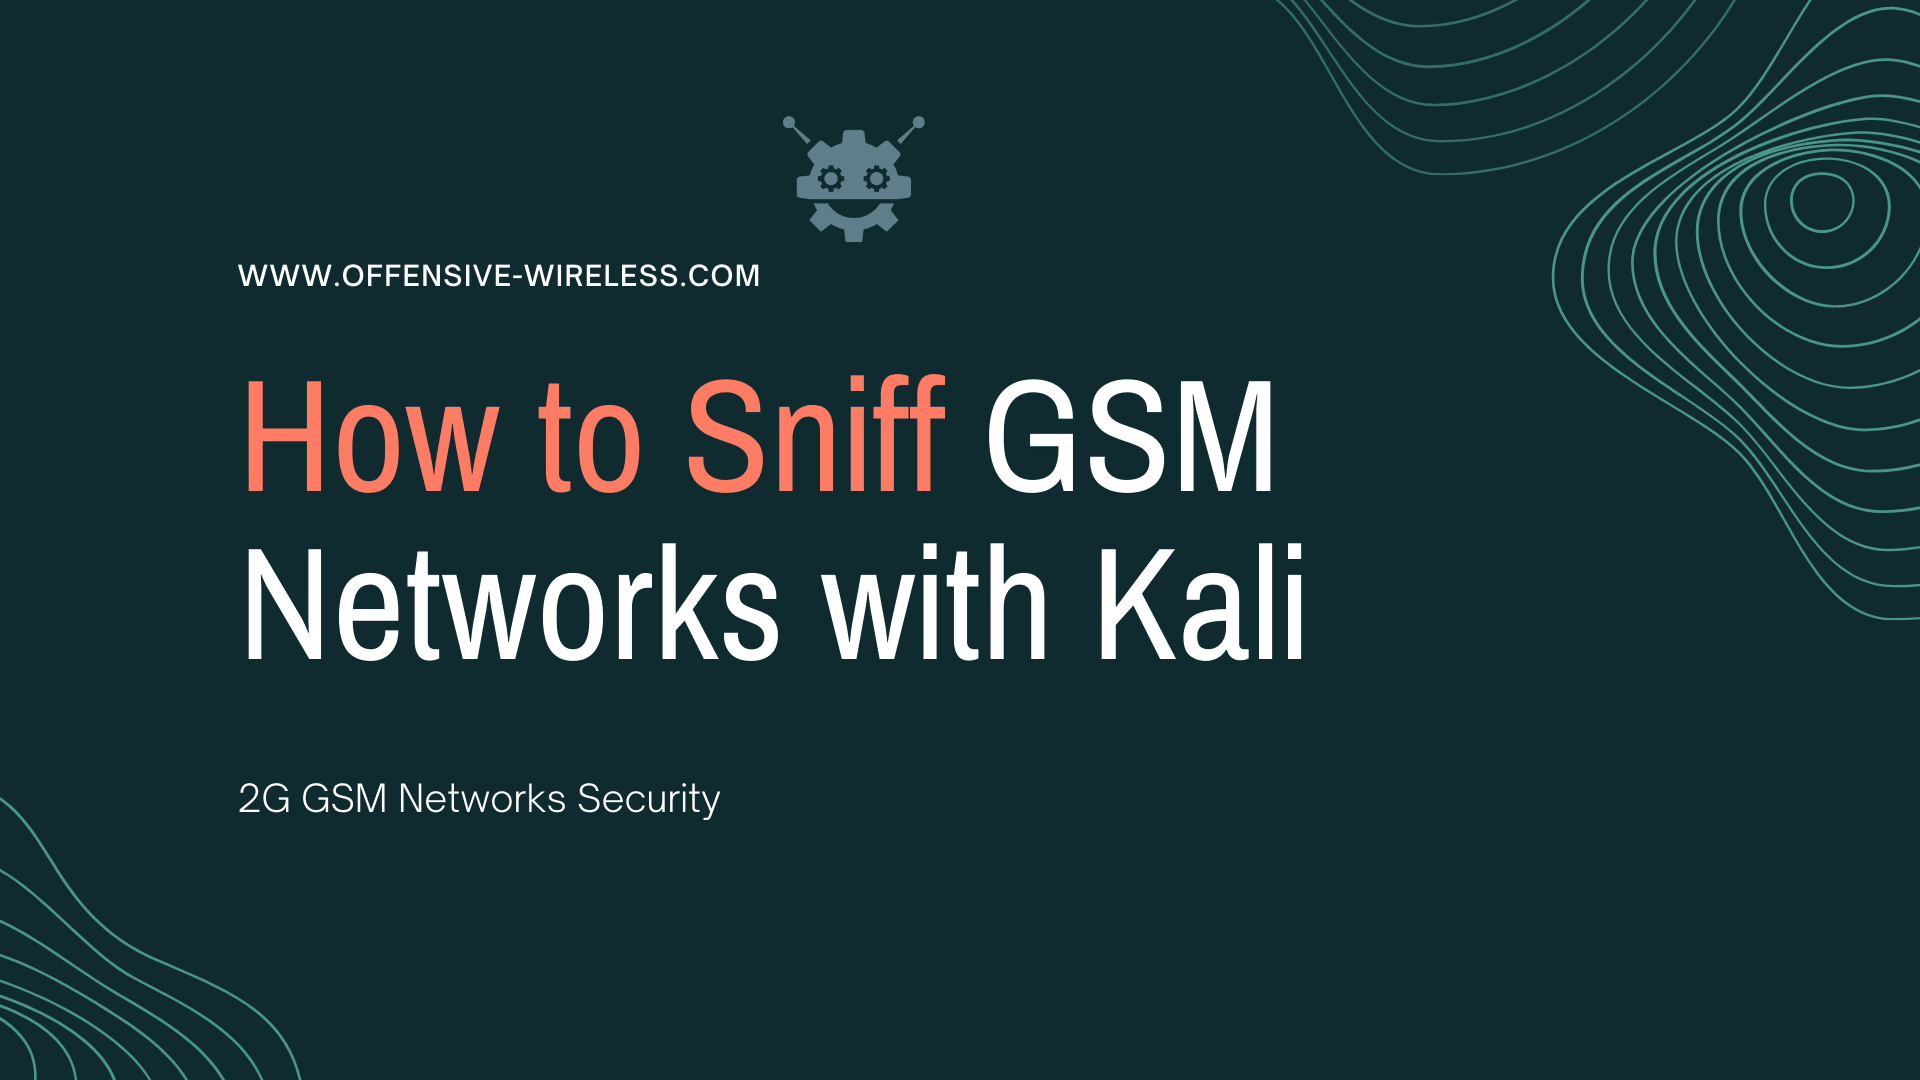 How to Sniff GSM Networks with Kali Linux on RaspberryPI